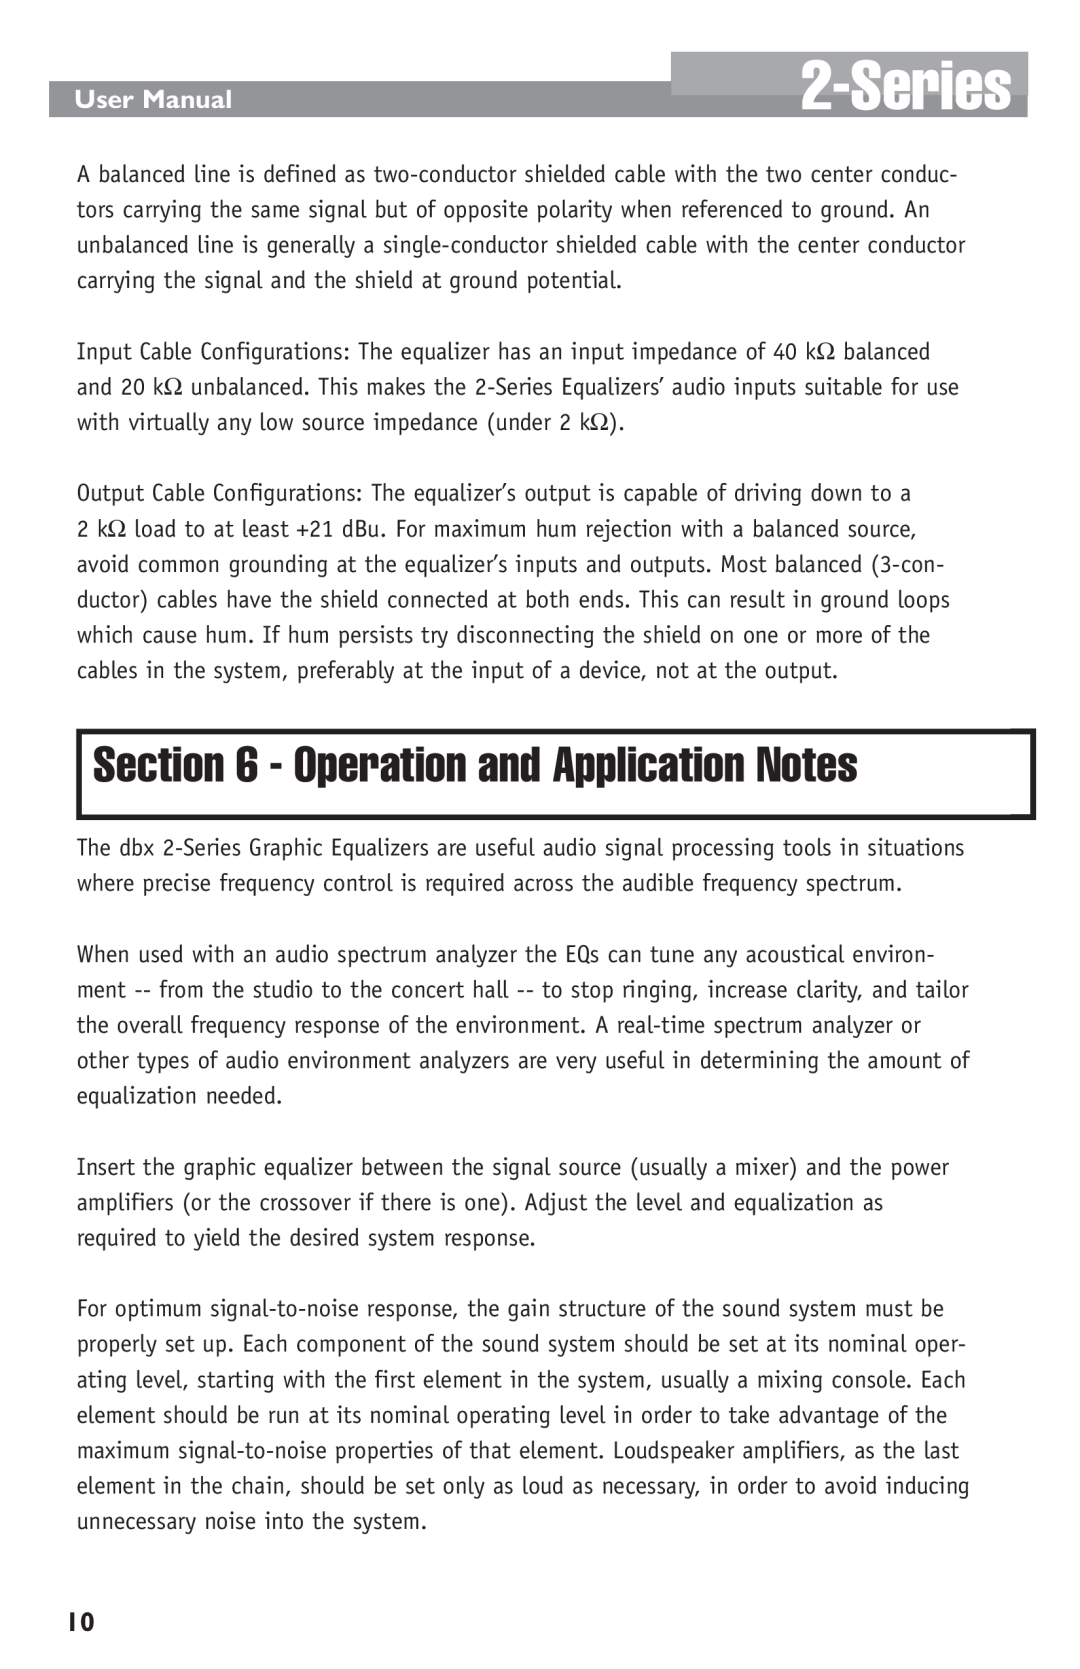 Harman not available user manual Operation and Application Notes, Series 